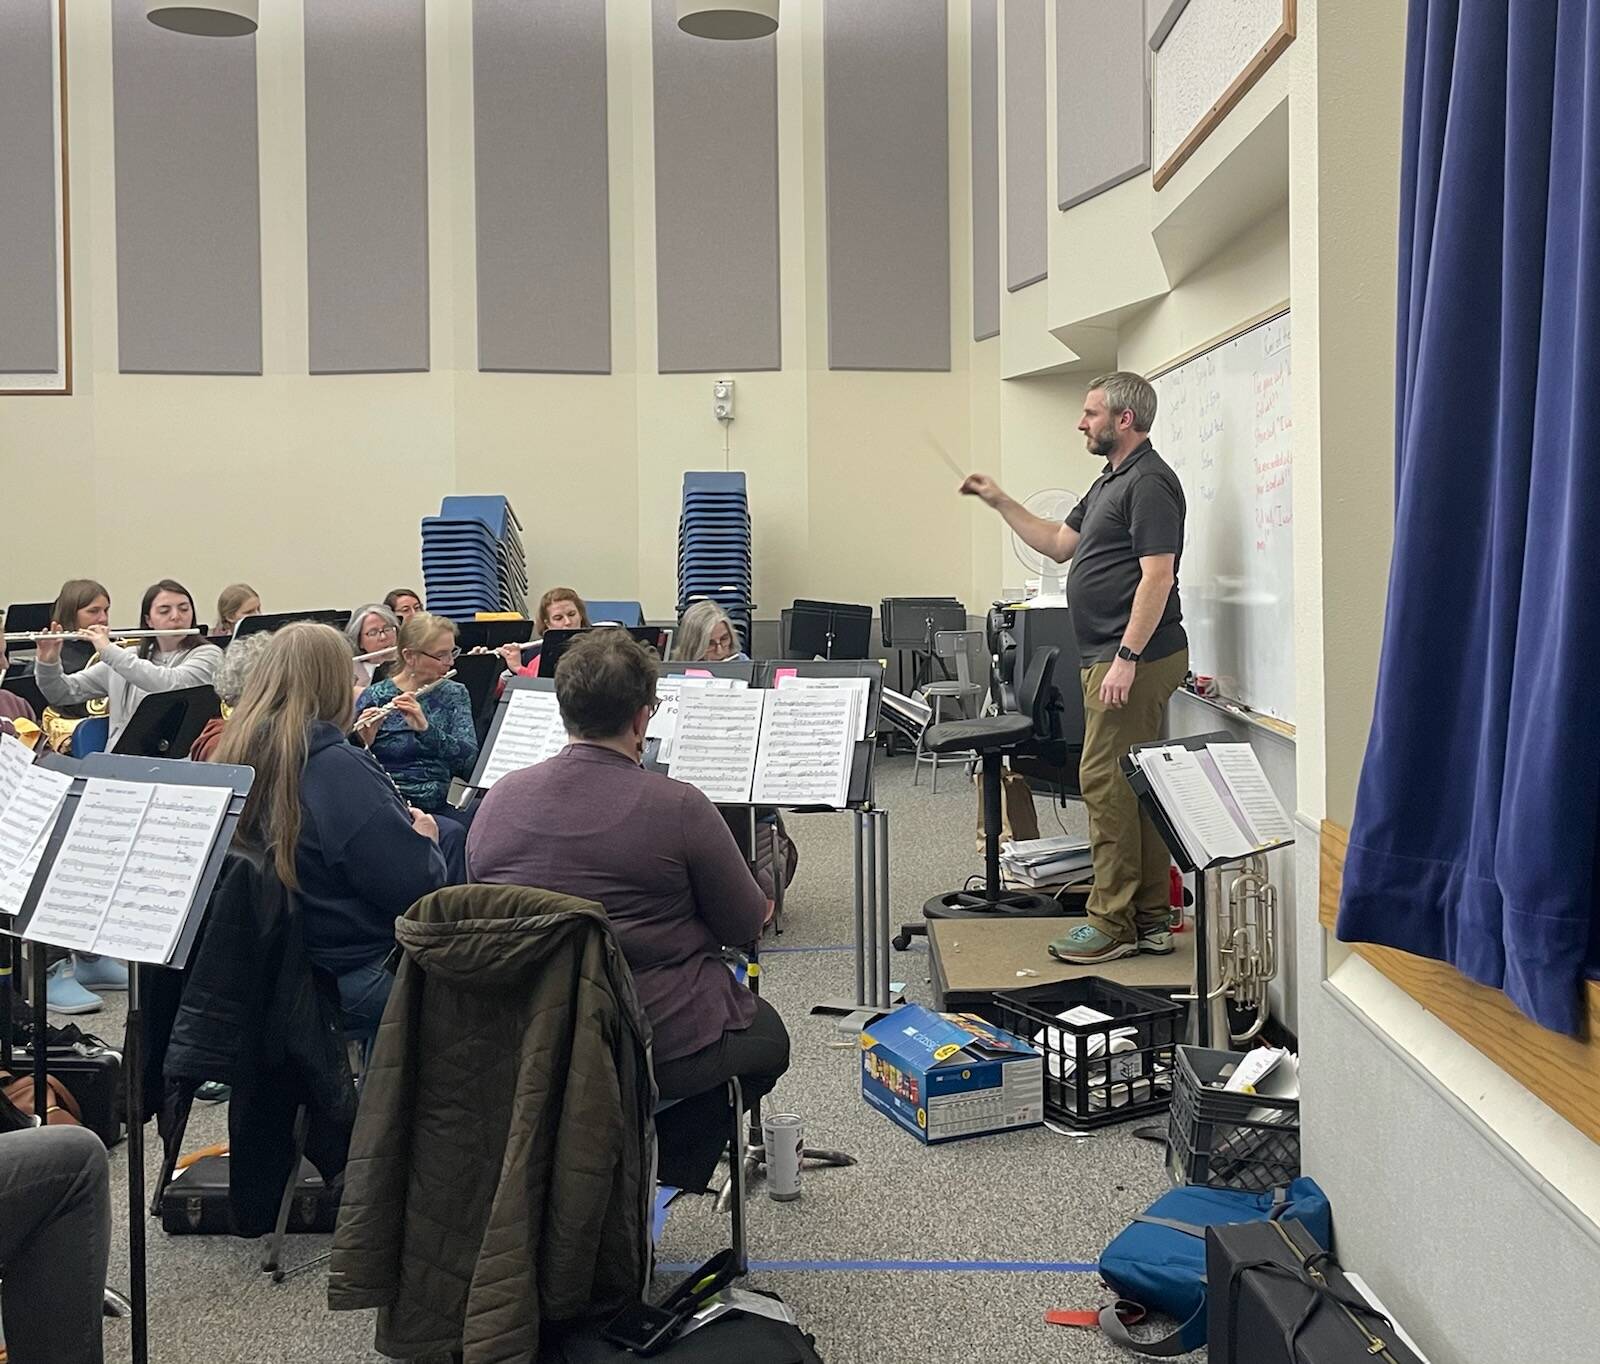 Photo by Emilie Spring/Homer News
Eric Simondsen conducts rehearsal for Inlet Wind community band at Homer High School on April 17.